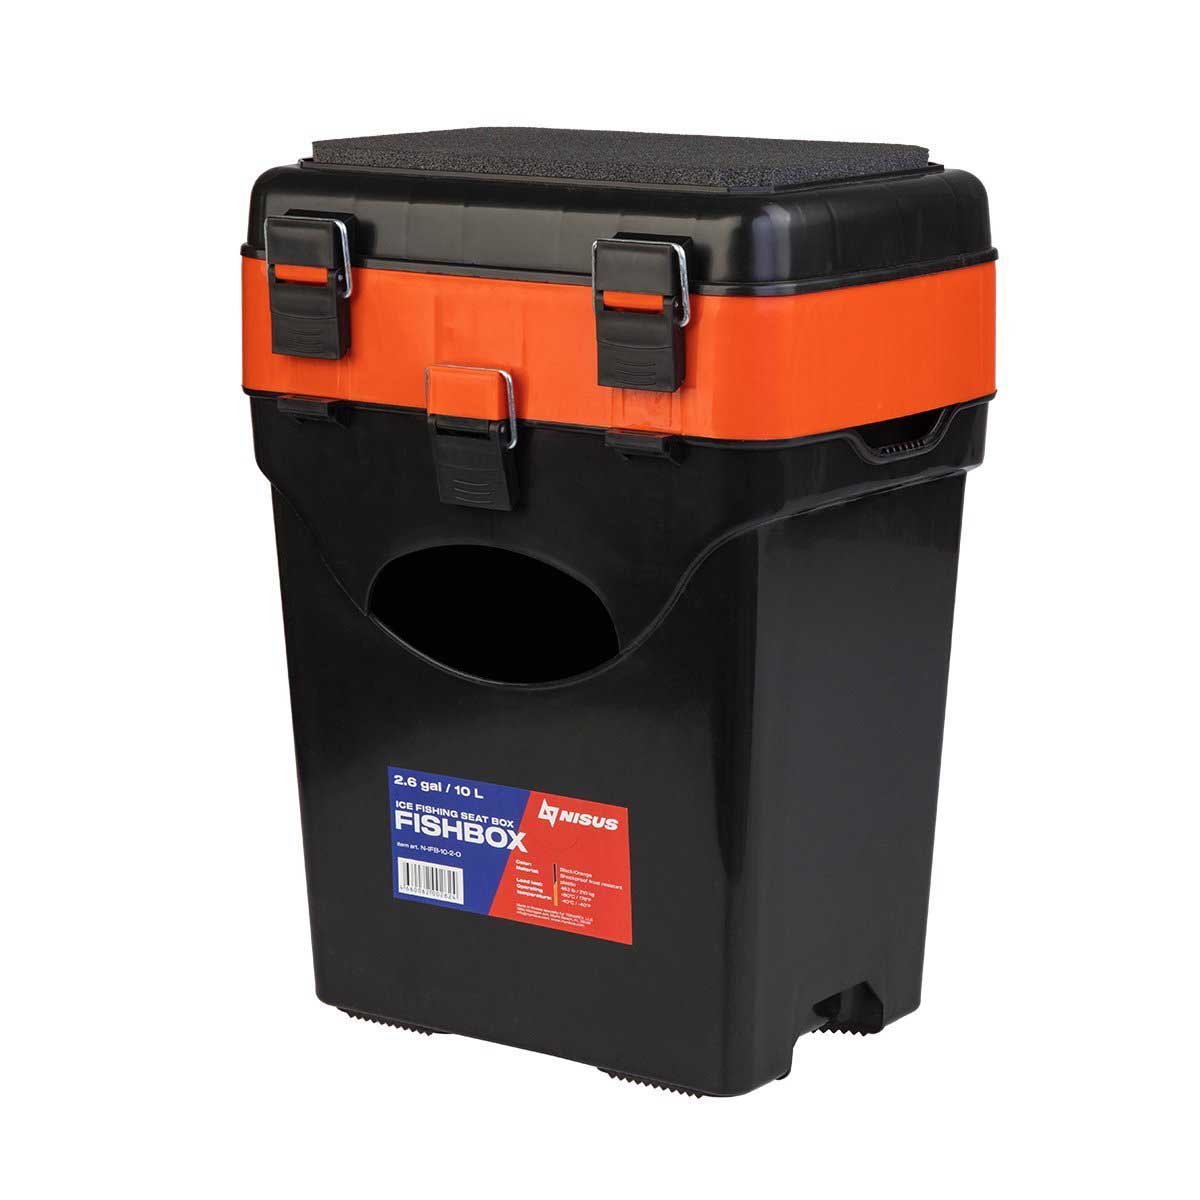 FishBox 10 liter SeatBox for Ice Fishing, 2 Compartments, Orange